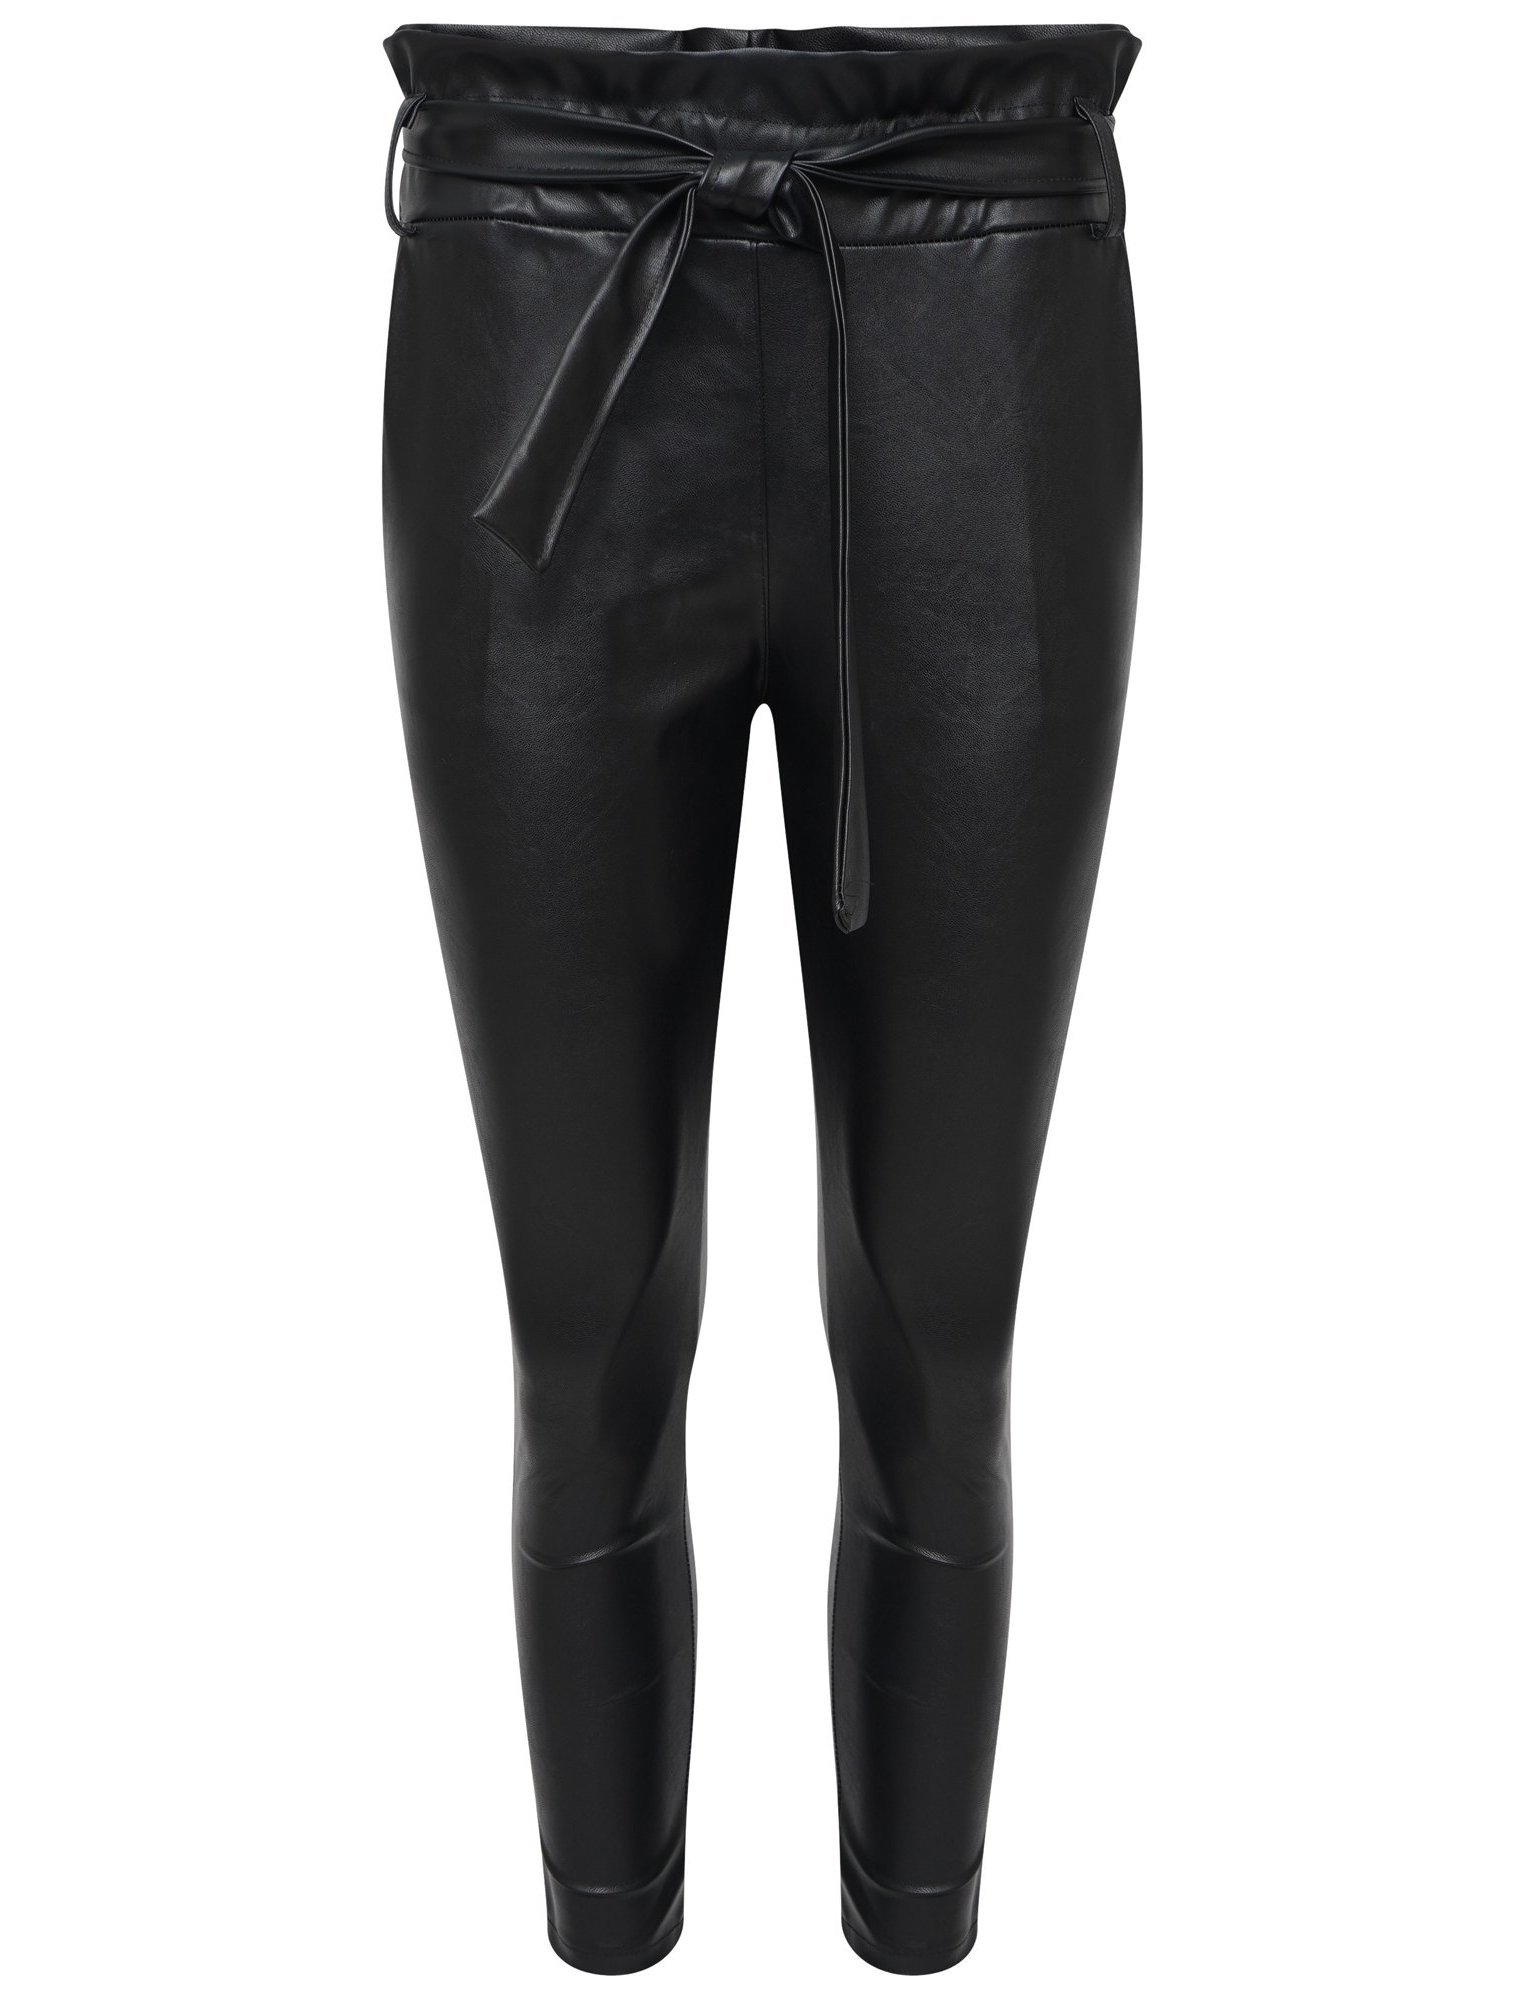 FAUX LEATHER PAPER BAG RELAXED FIT CROPPED TROUSER - BLACK - S